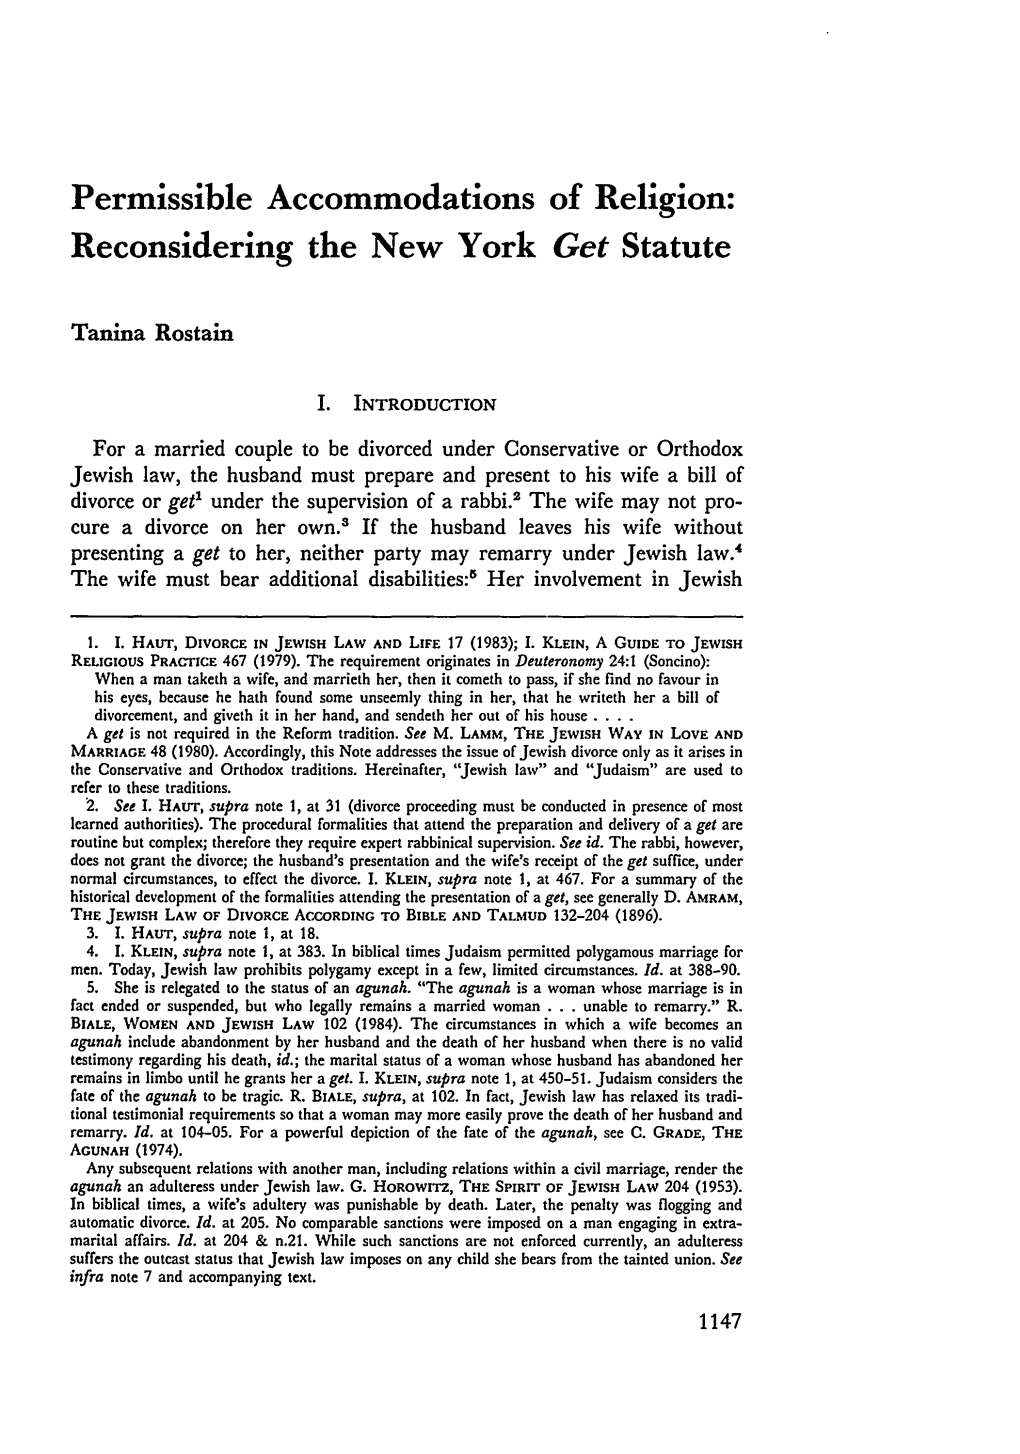 Permissible Accommodations of Religion: Reconsidering the New York Get Statute